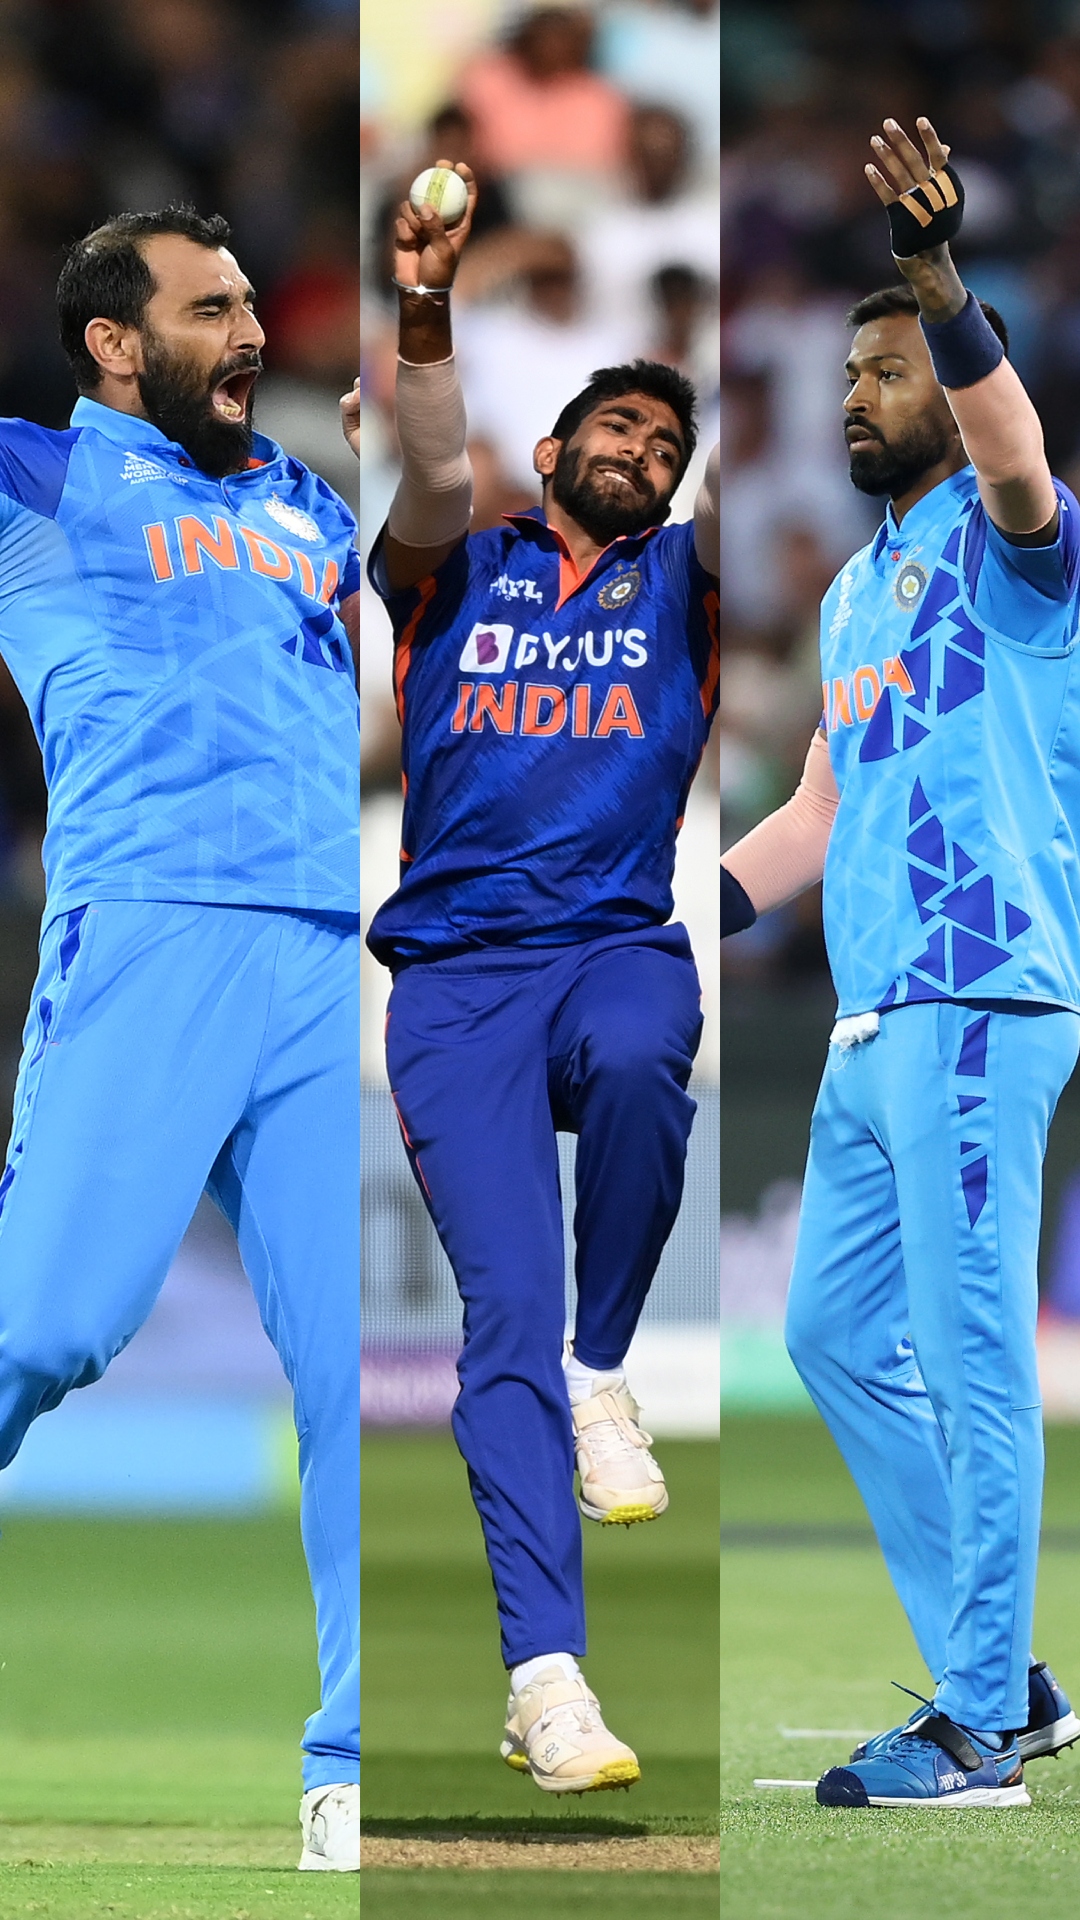 IND vs NZ 3rd ODI: From Jasprit Bumrah to Hardik Pandya, here's a list of Indian bowlers with most ODI wickets in powerplay